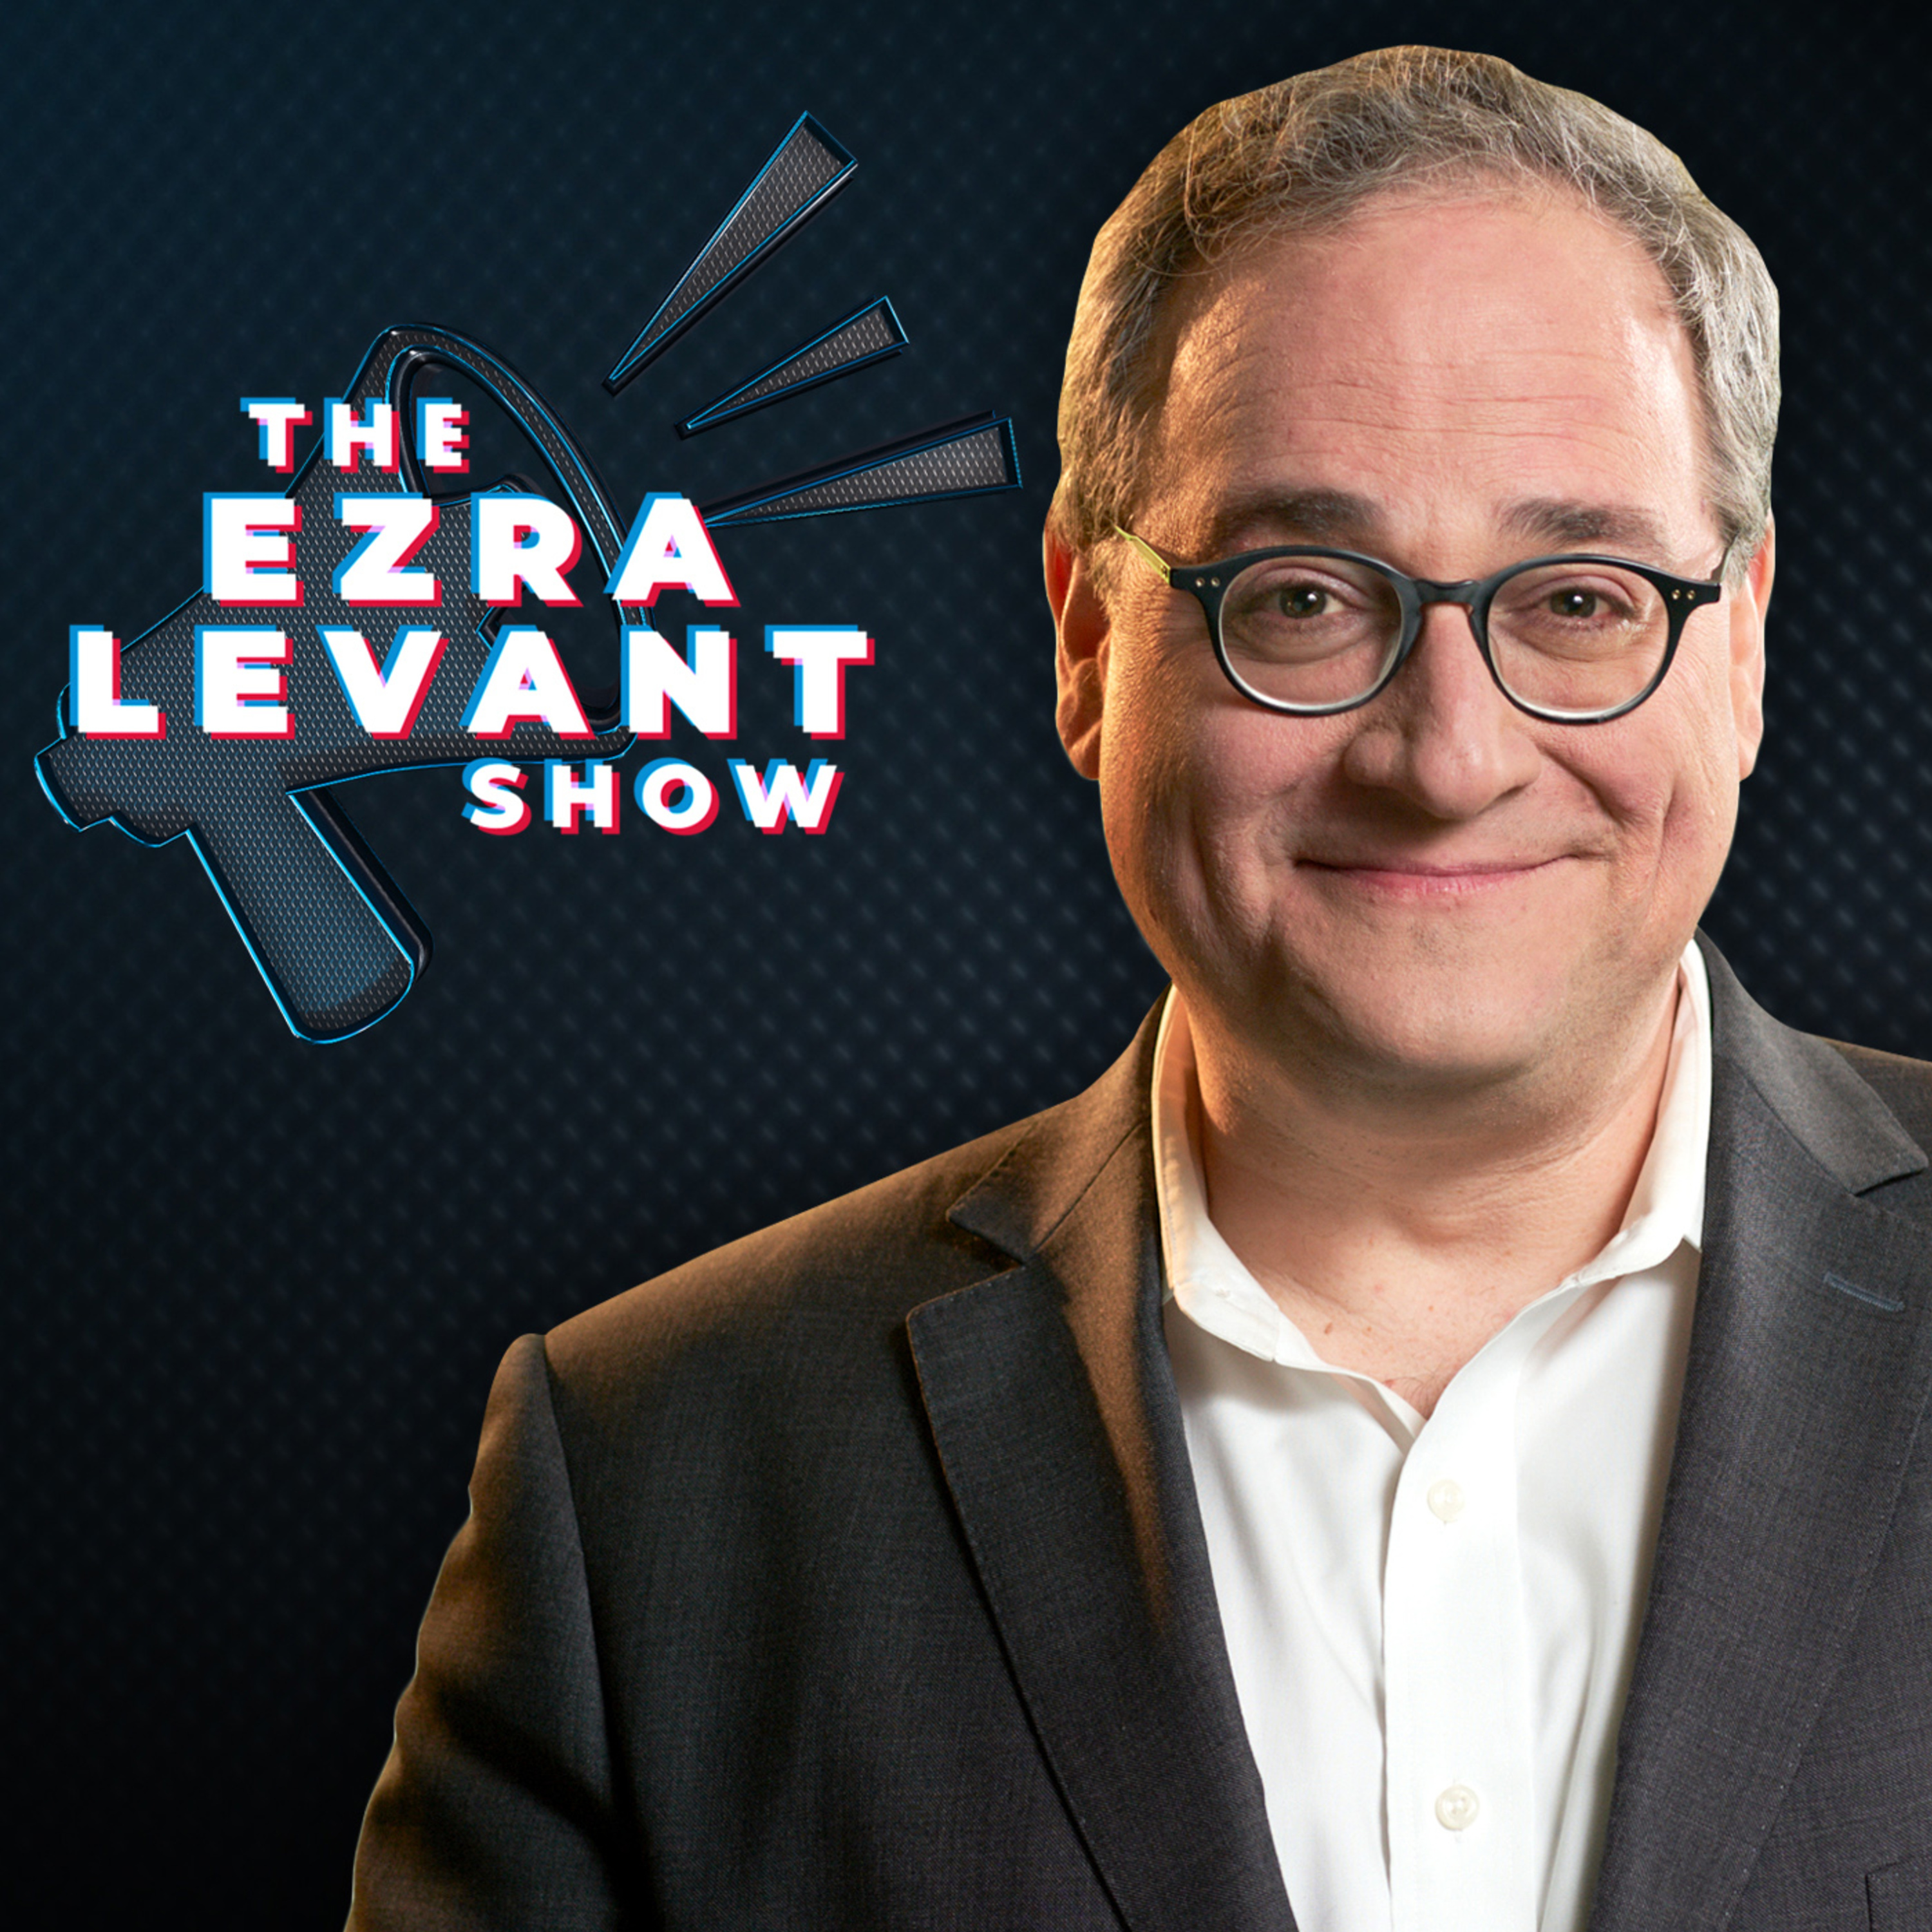 EZRA LEVANT | Hamas supporter repeatedly issues death threats while the police stand by. Is it cowardice? Is it fear?